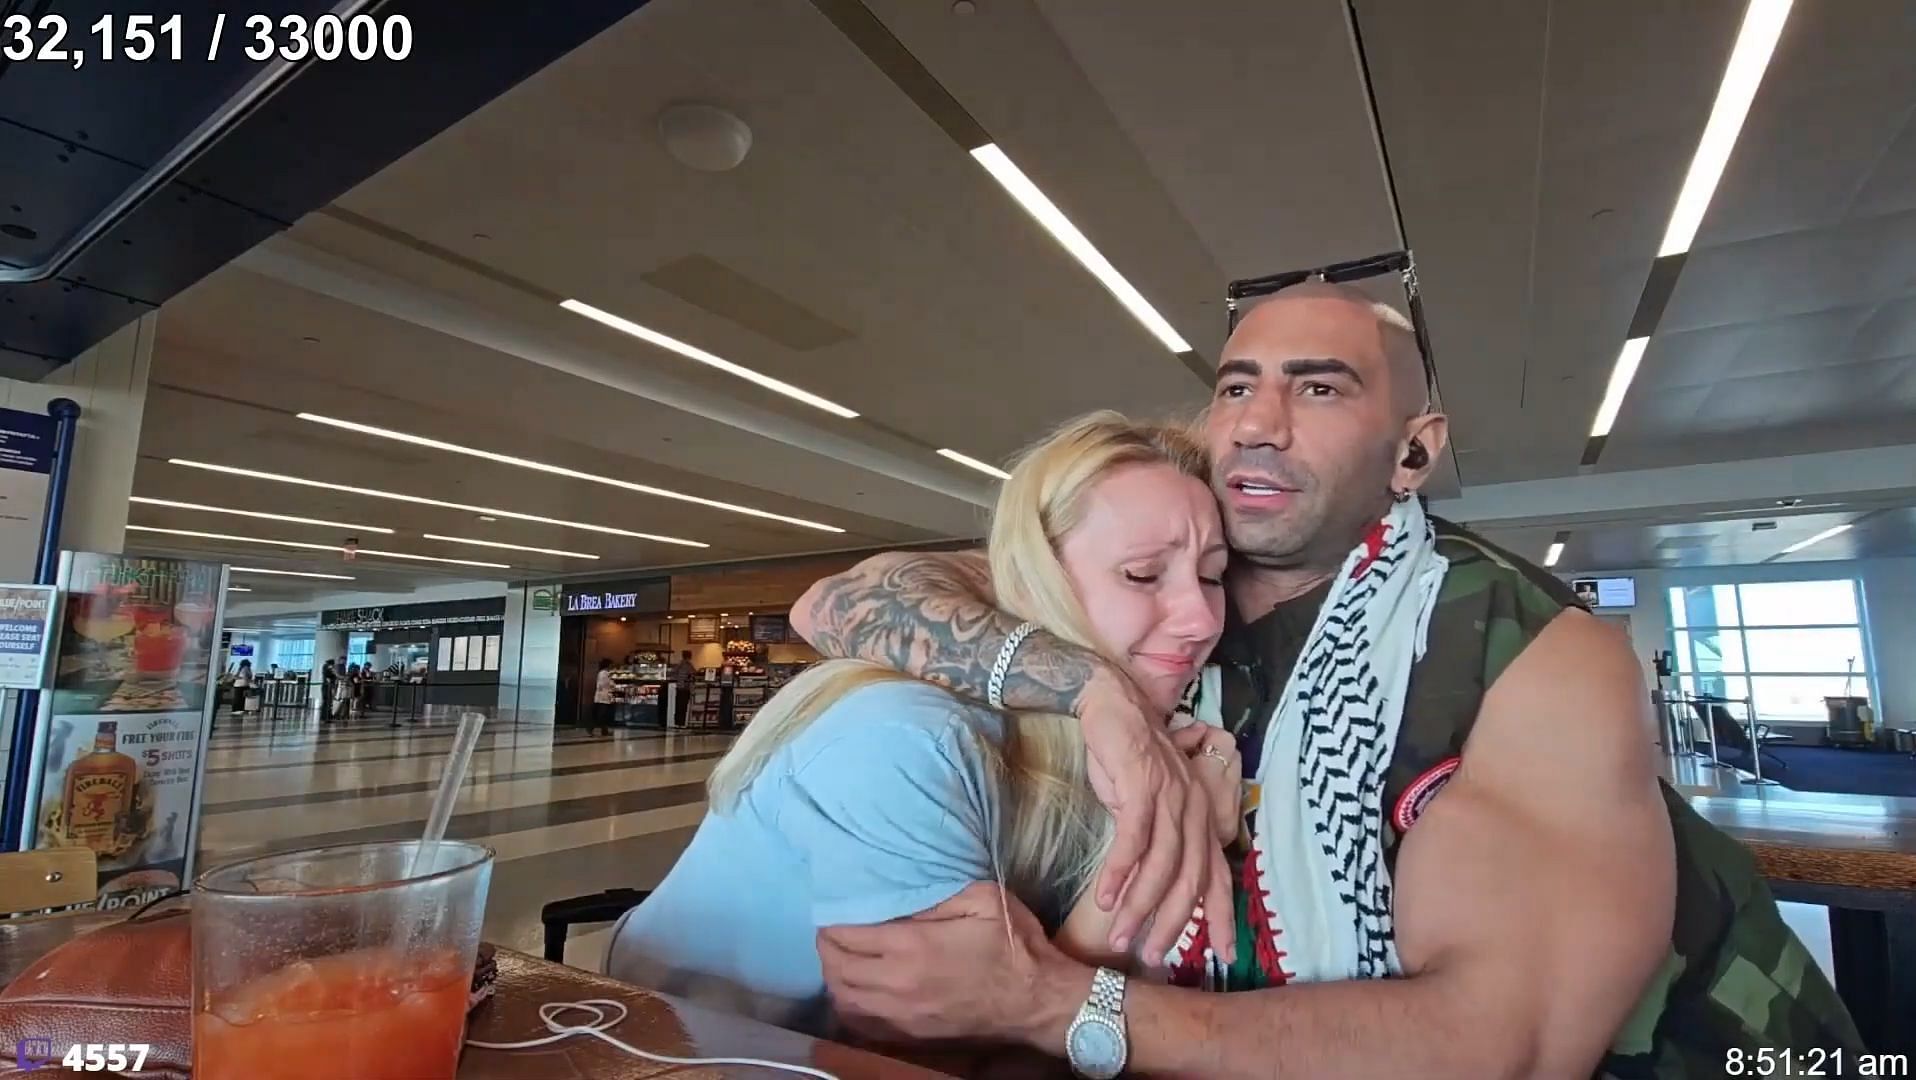 Twitch streamer and YouTuber Fousey accused of taking advantage of drunk woman